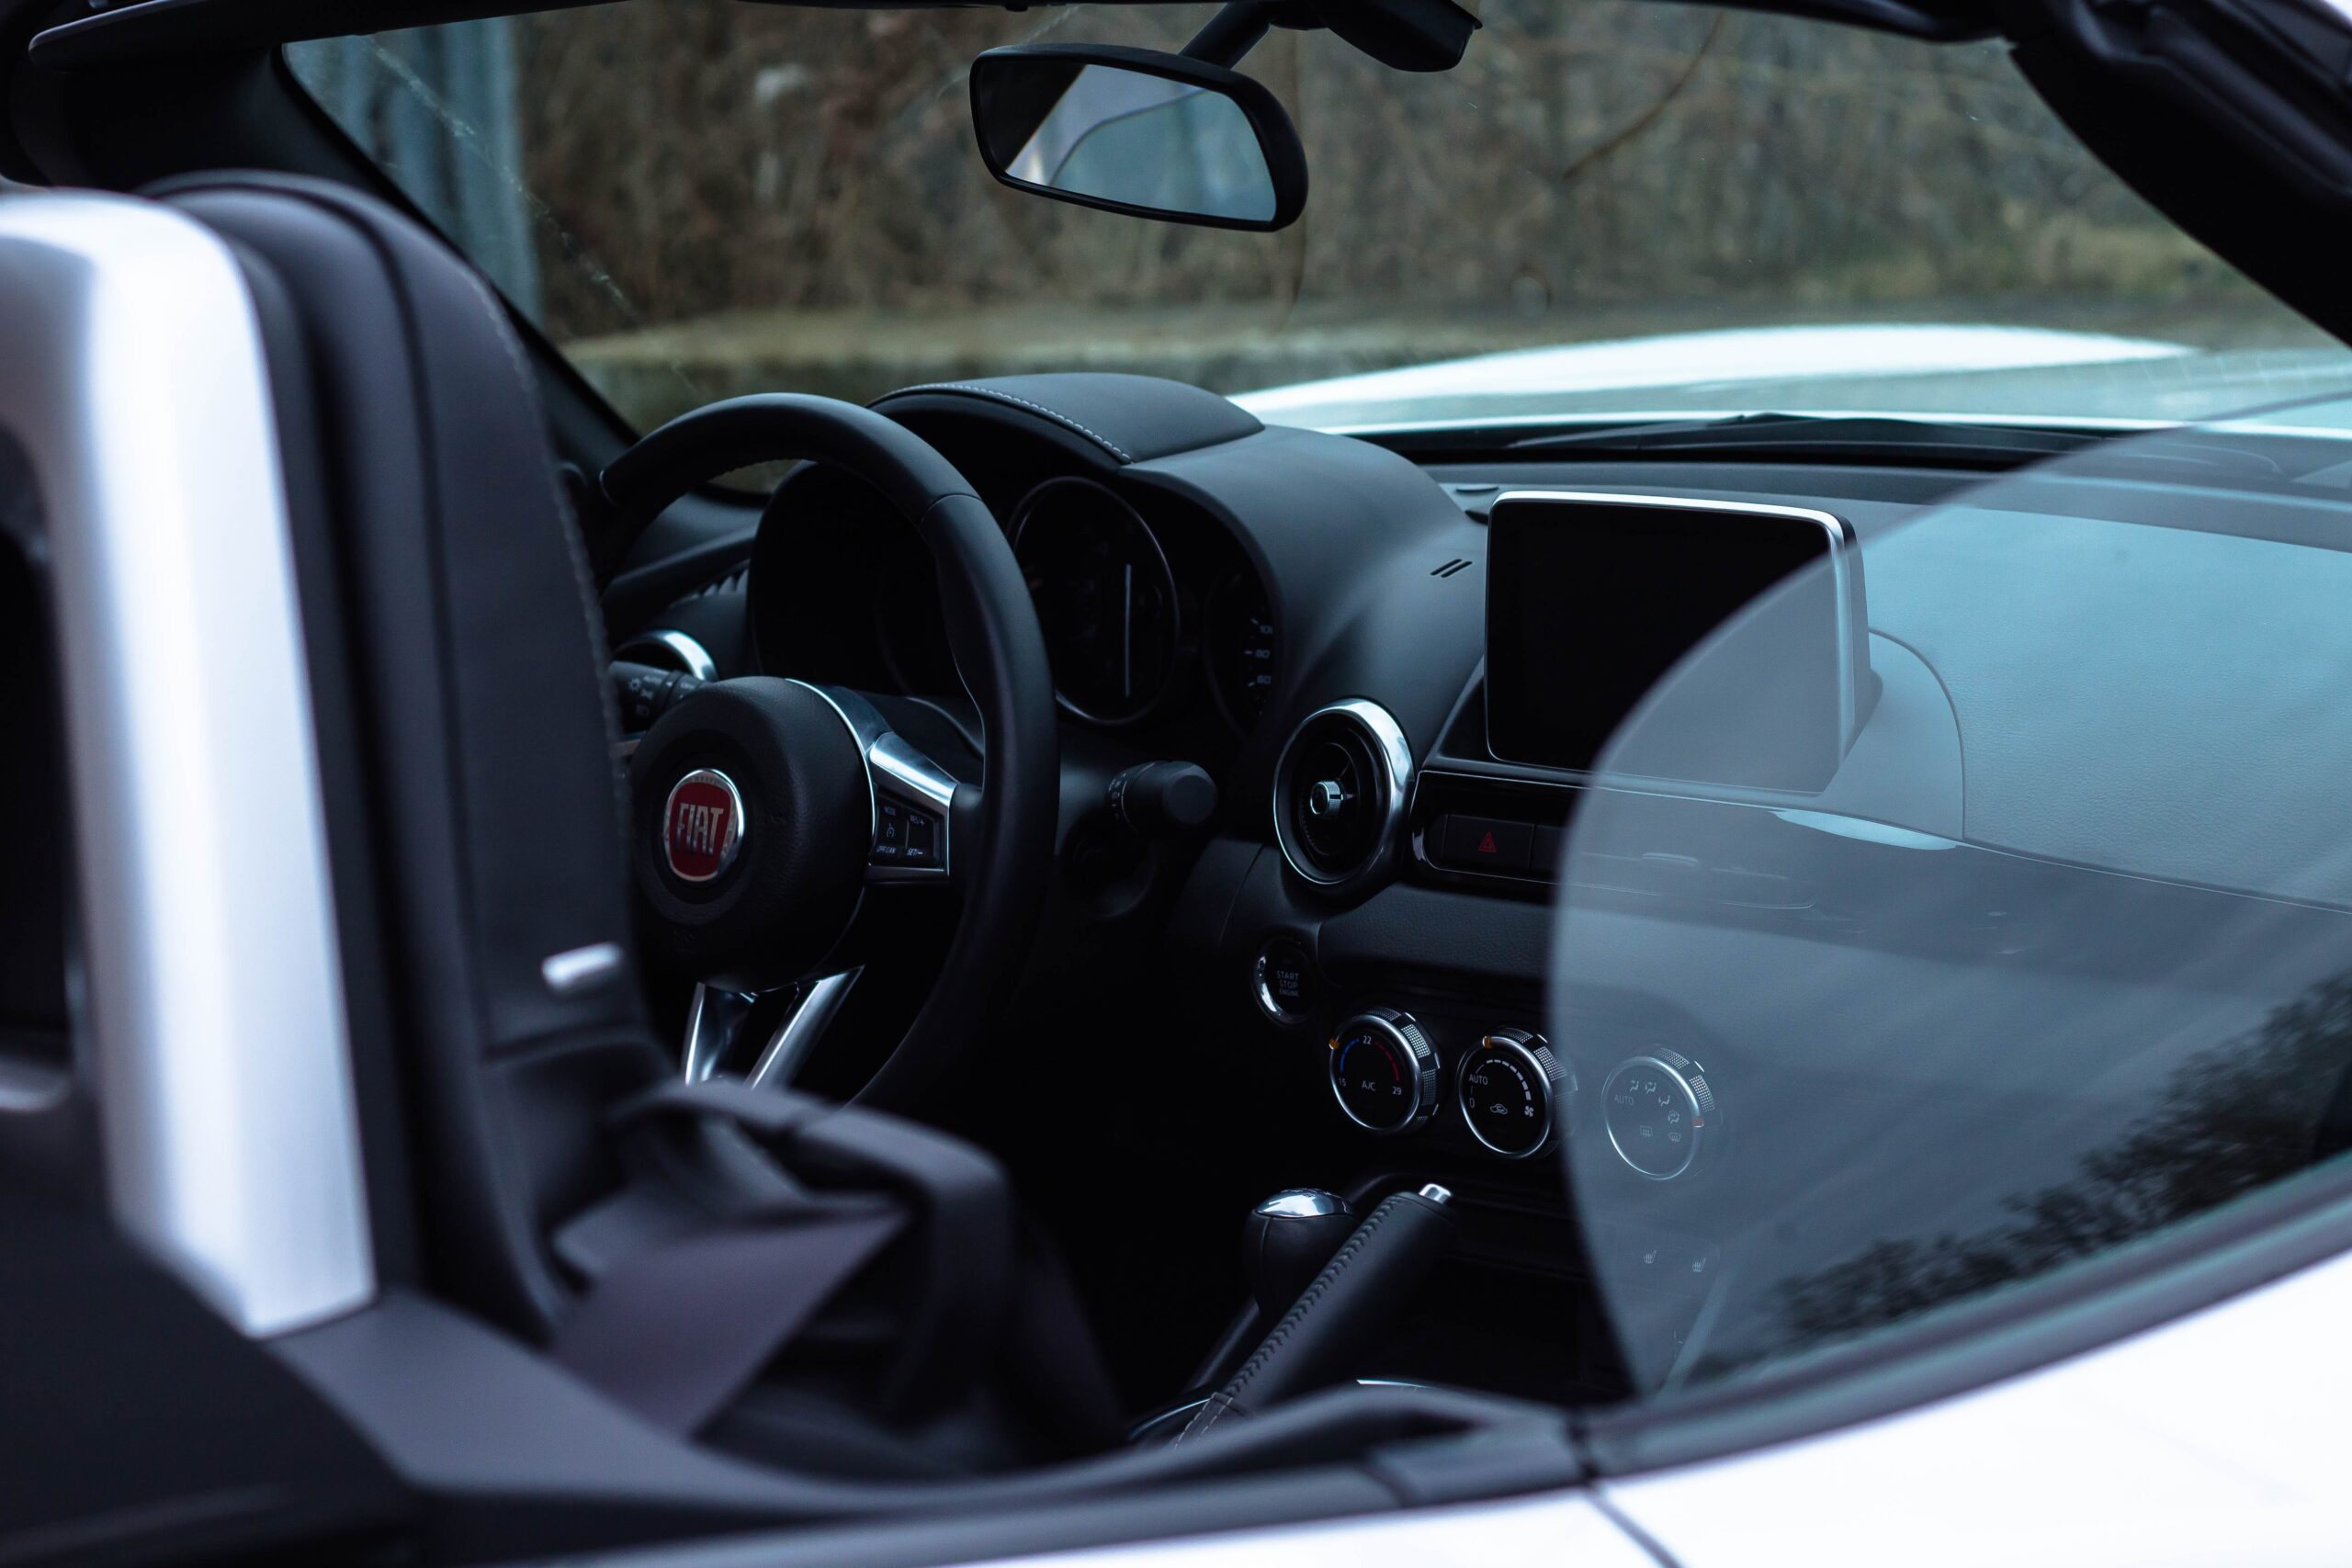 a shot of a car interior looking through the window.